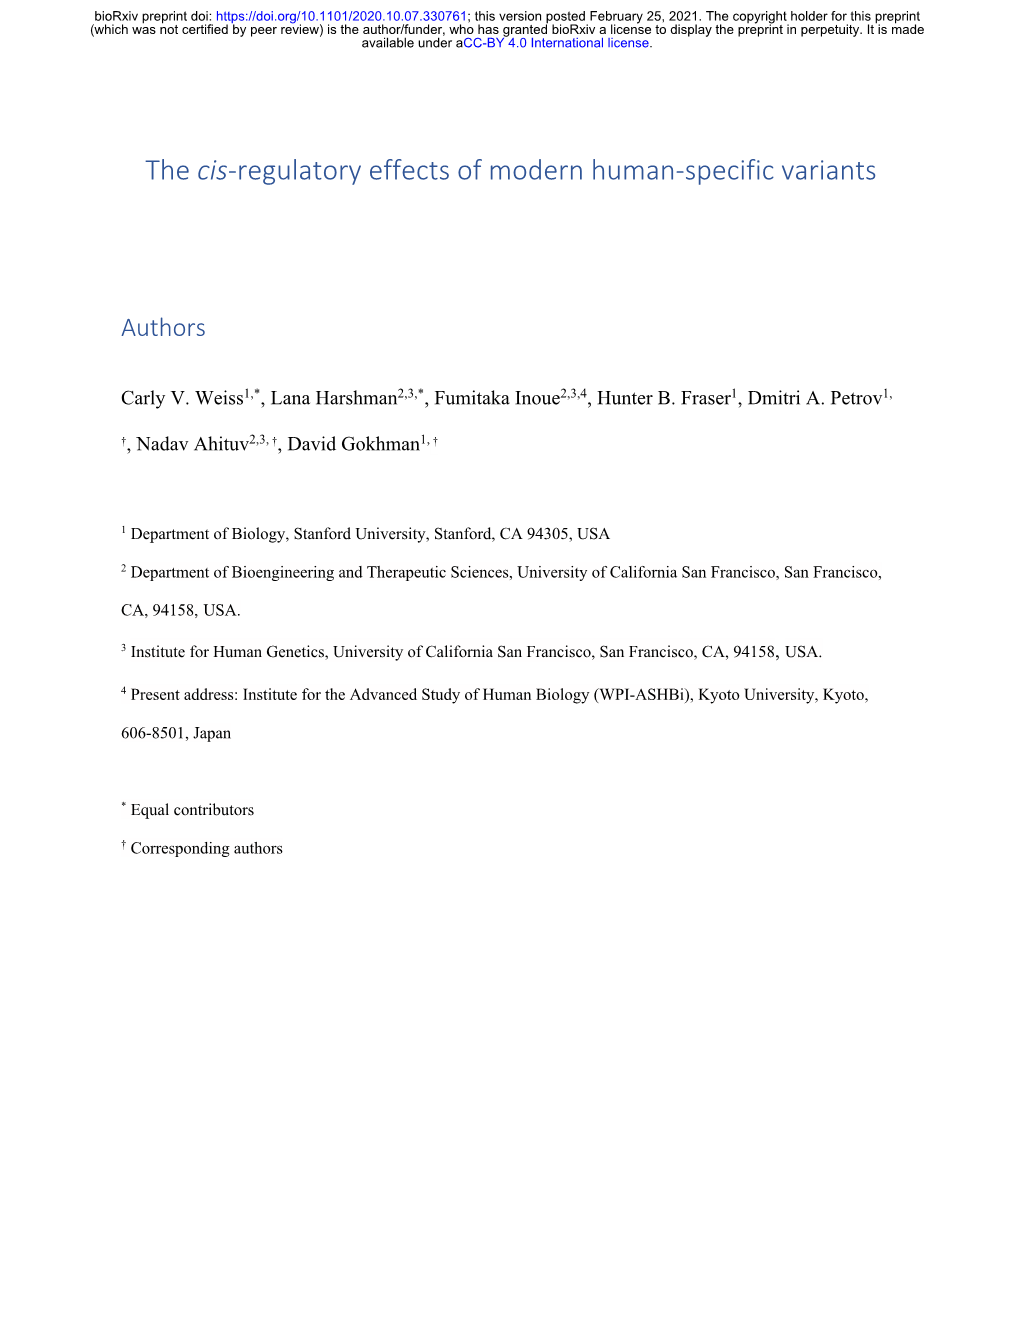 The Cis-Regulatory Effects of Modern Human-Specific Variants